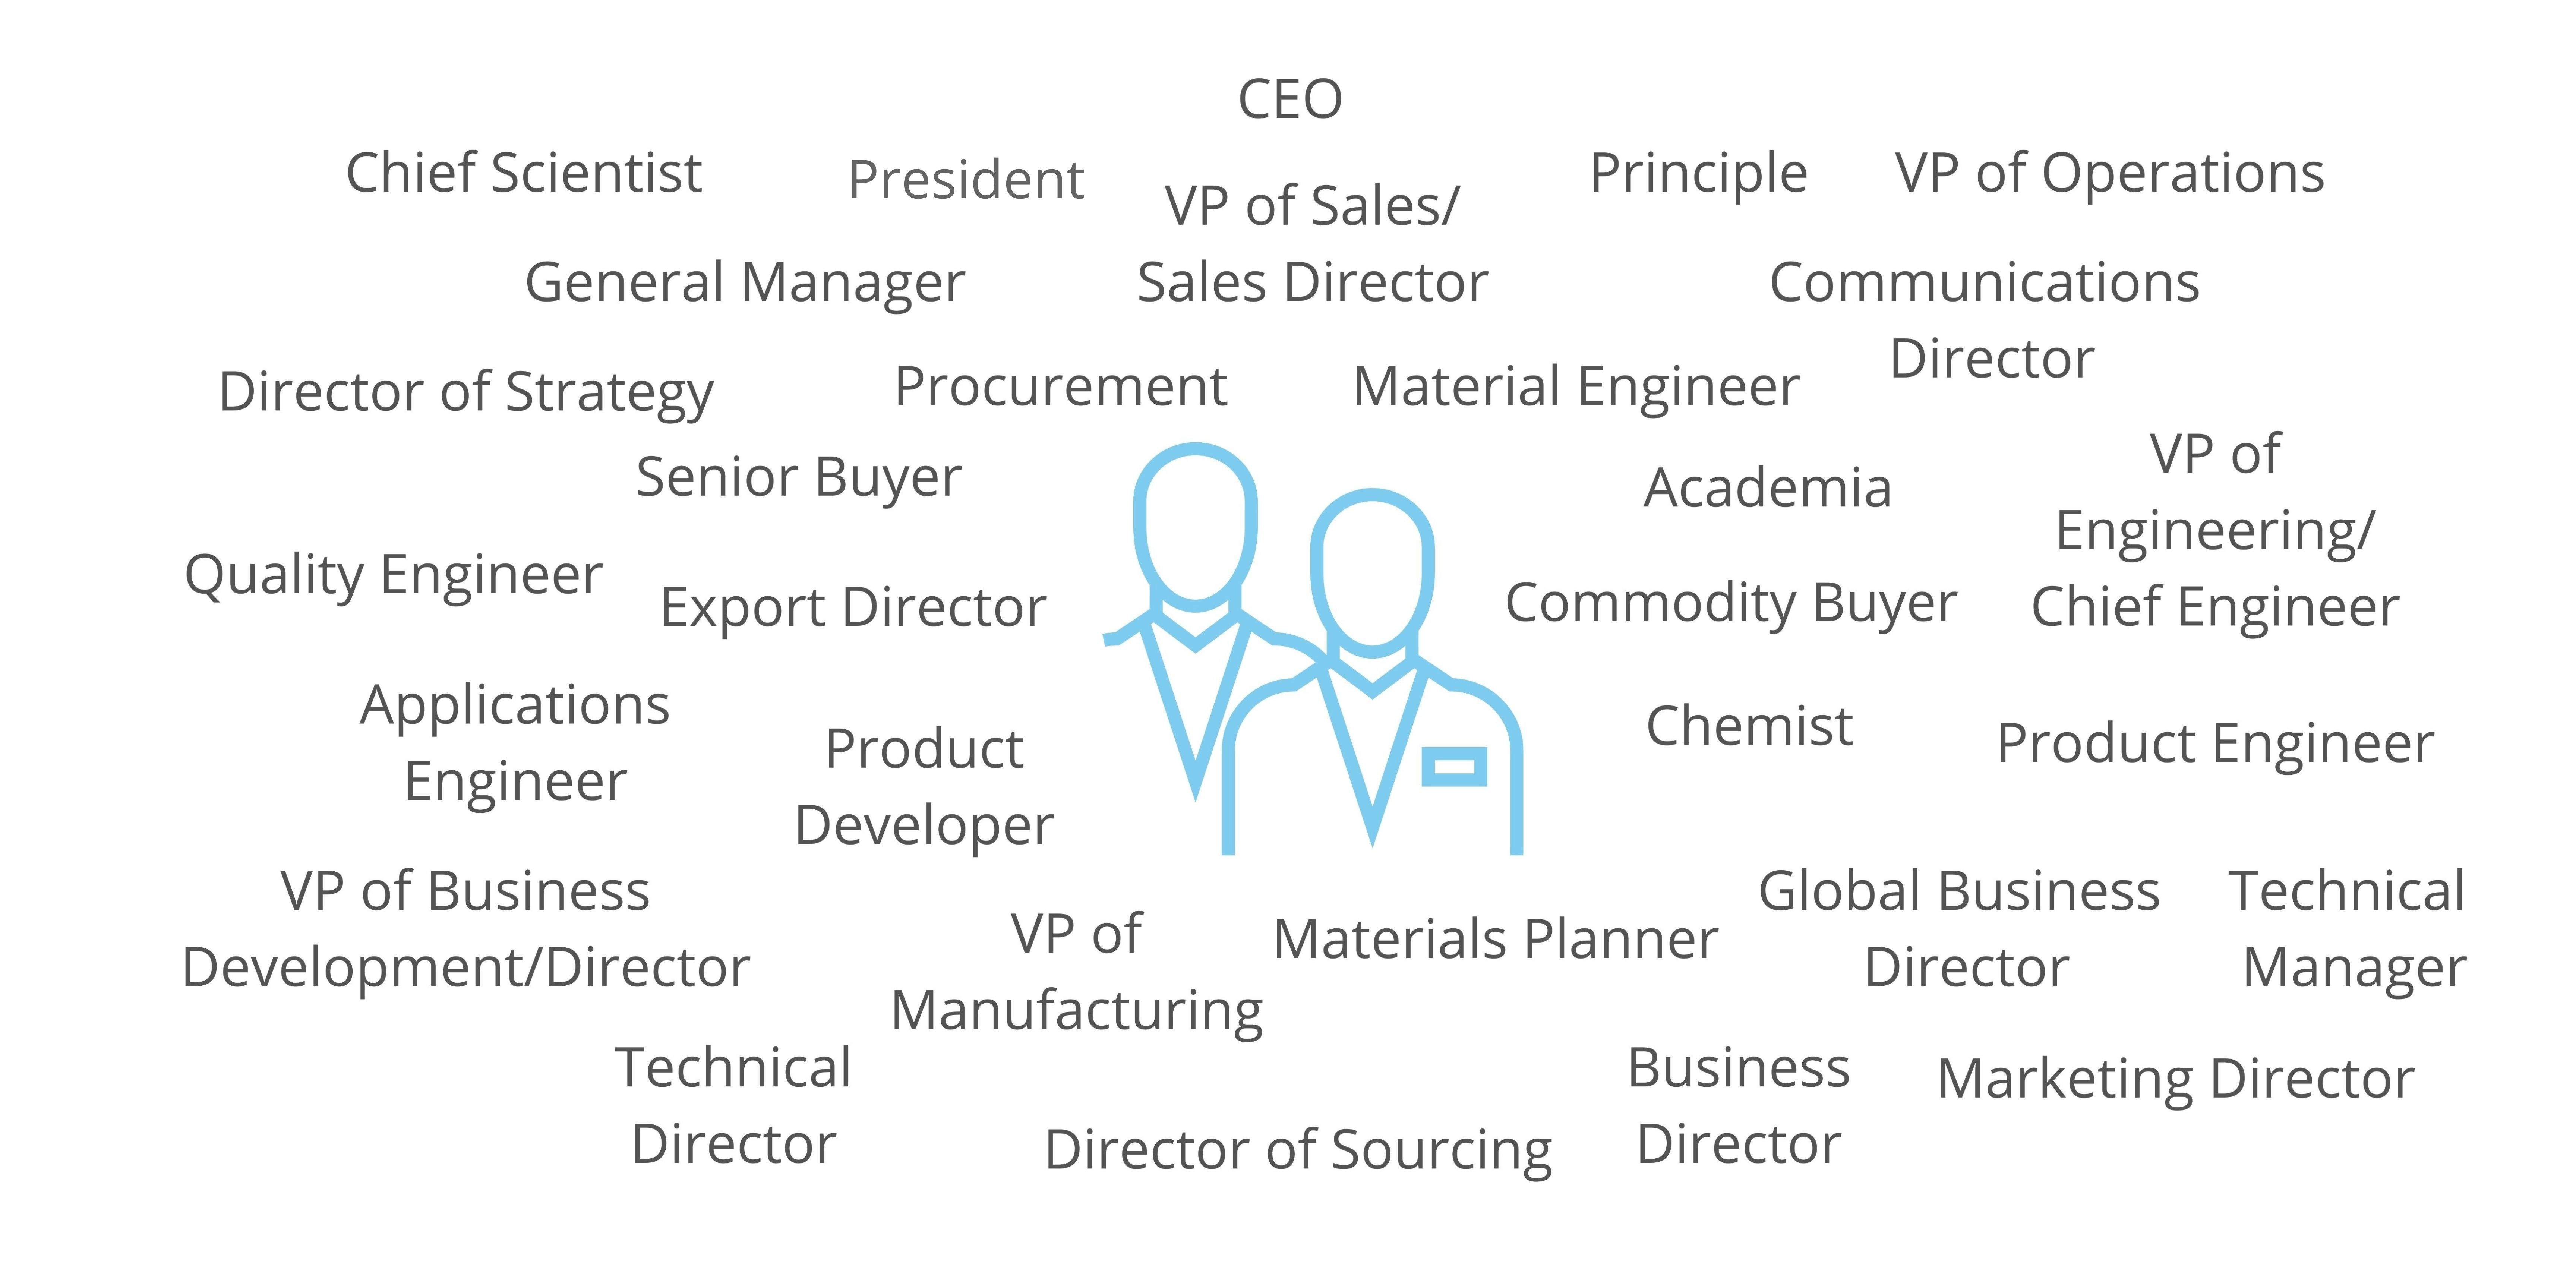 Job functions of attendees: CEO, Senior Buyer, Business Director, Chemist, Marketing Director, Senior Buyer, Principle and much more